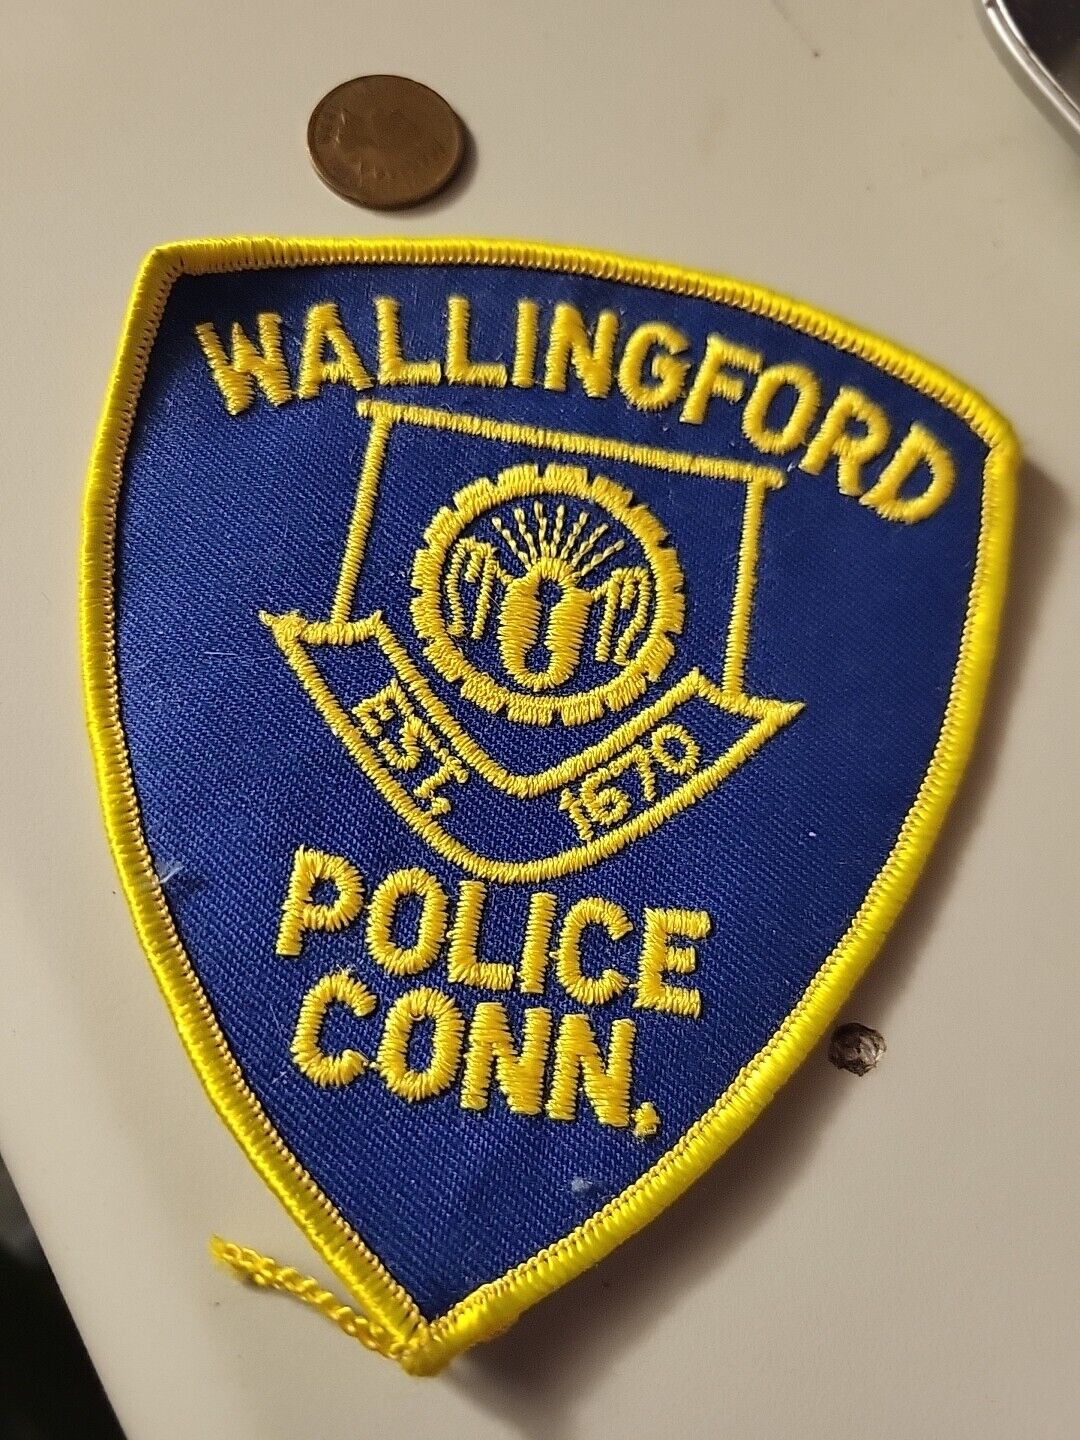 Vintage obsolete Willingford police Connecticut